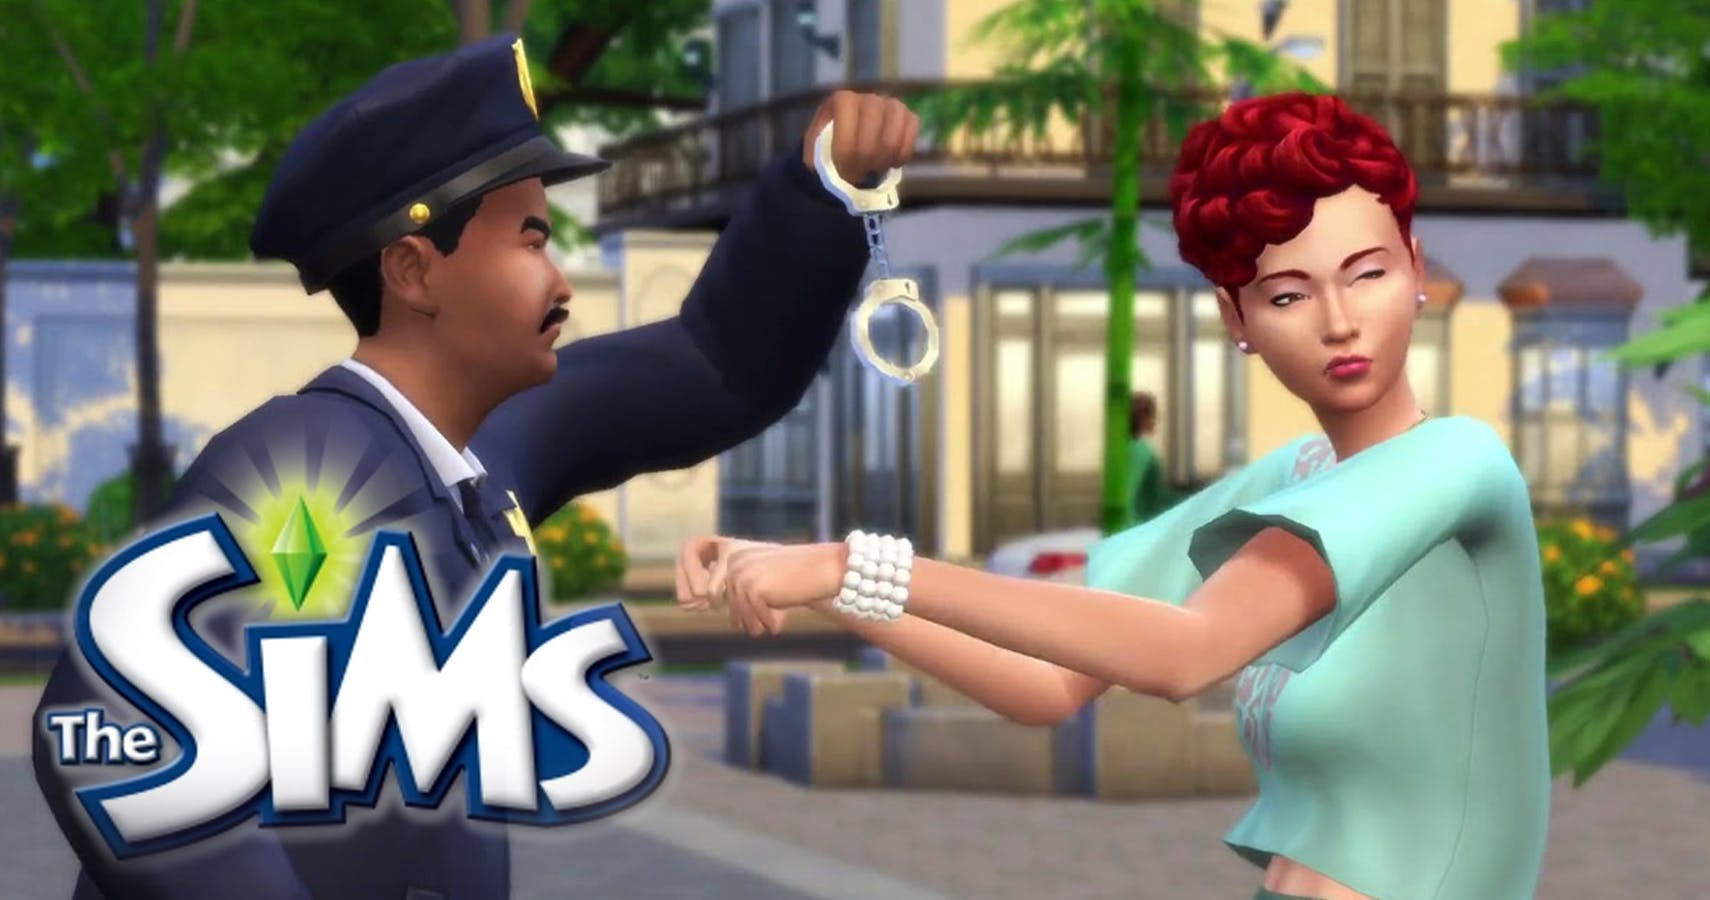 sims 4 mods extreme violence download